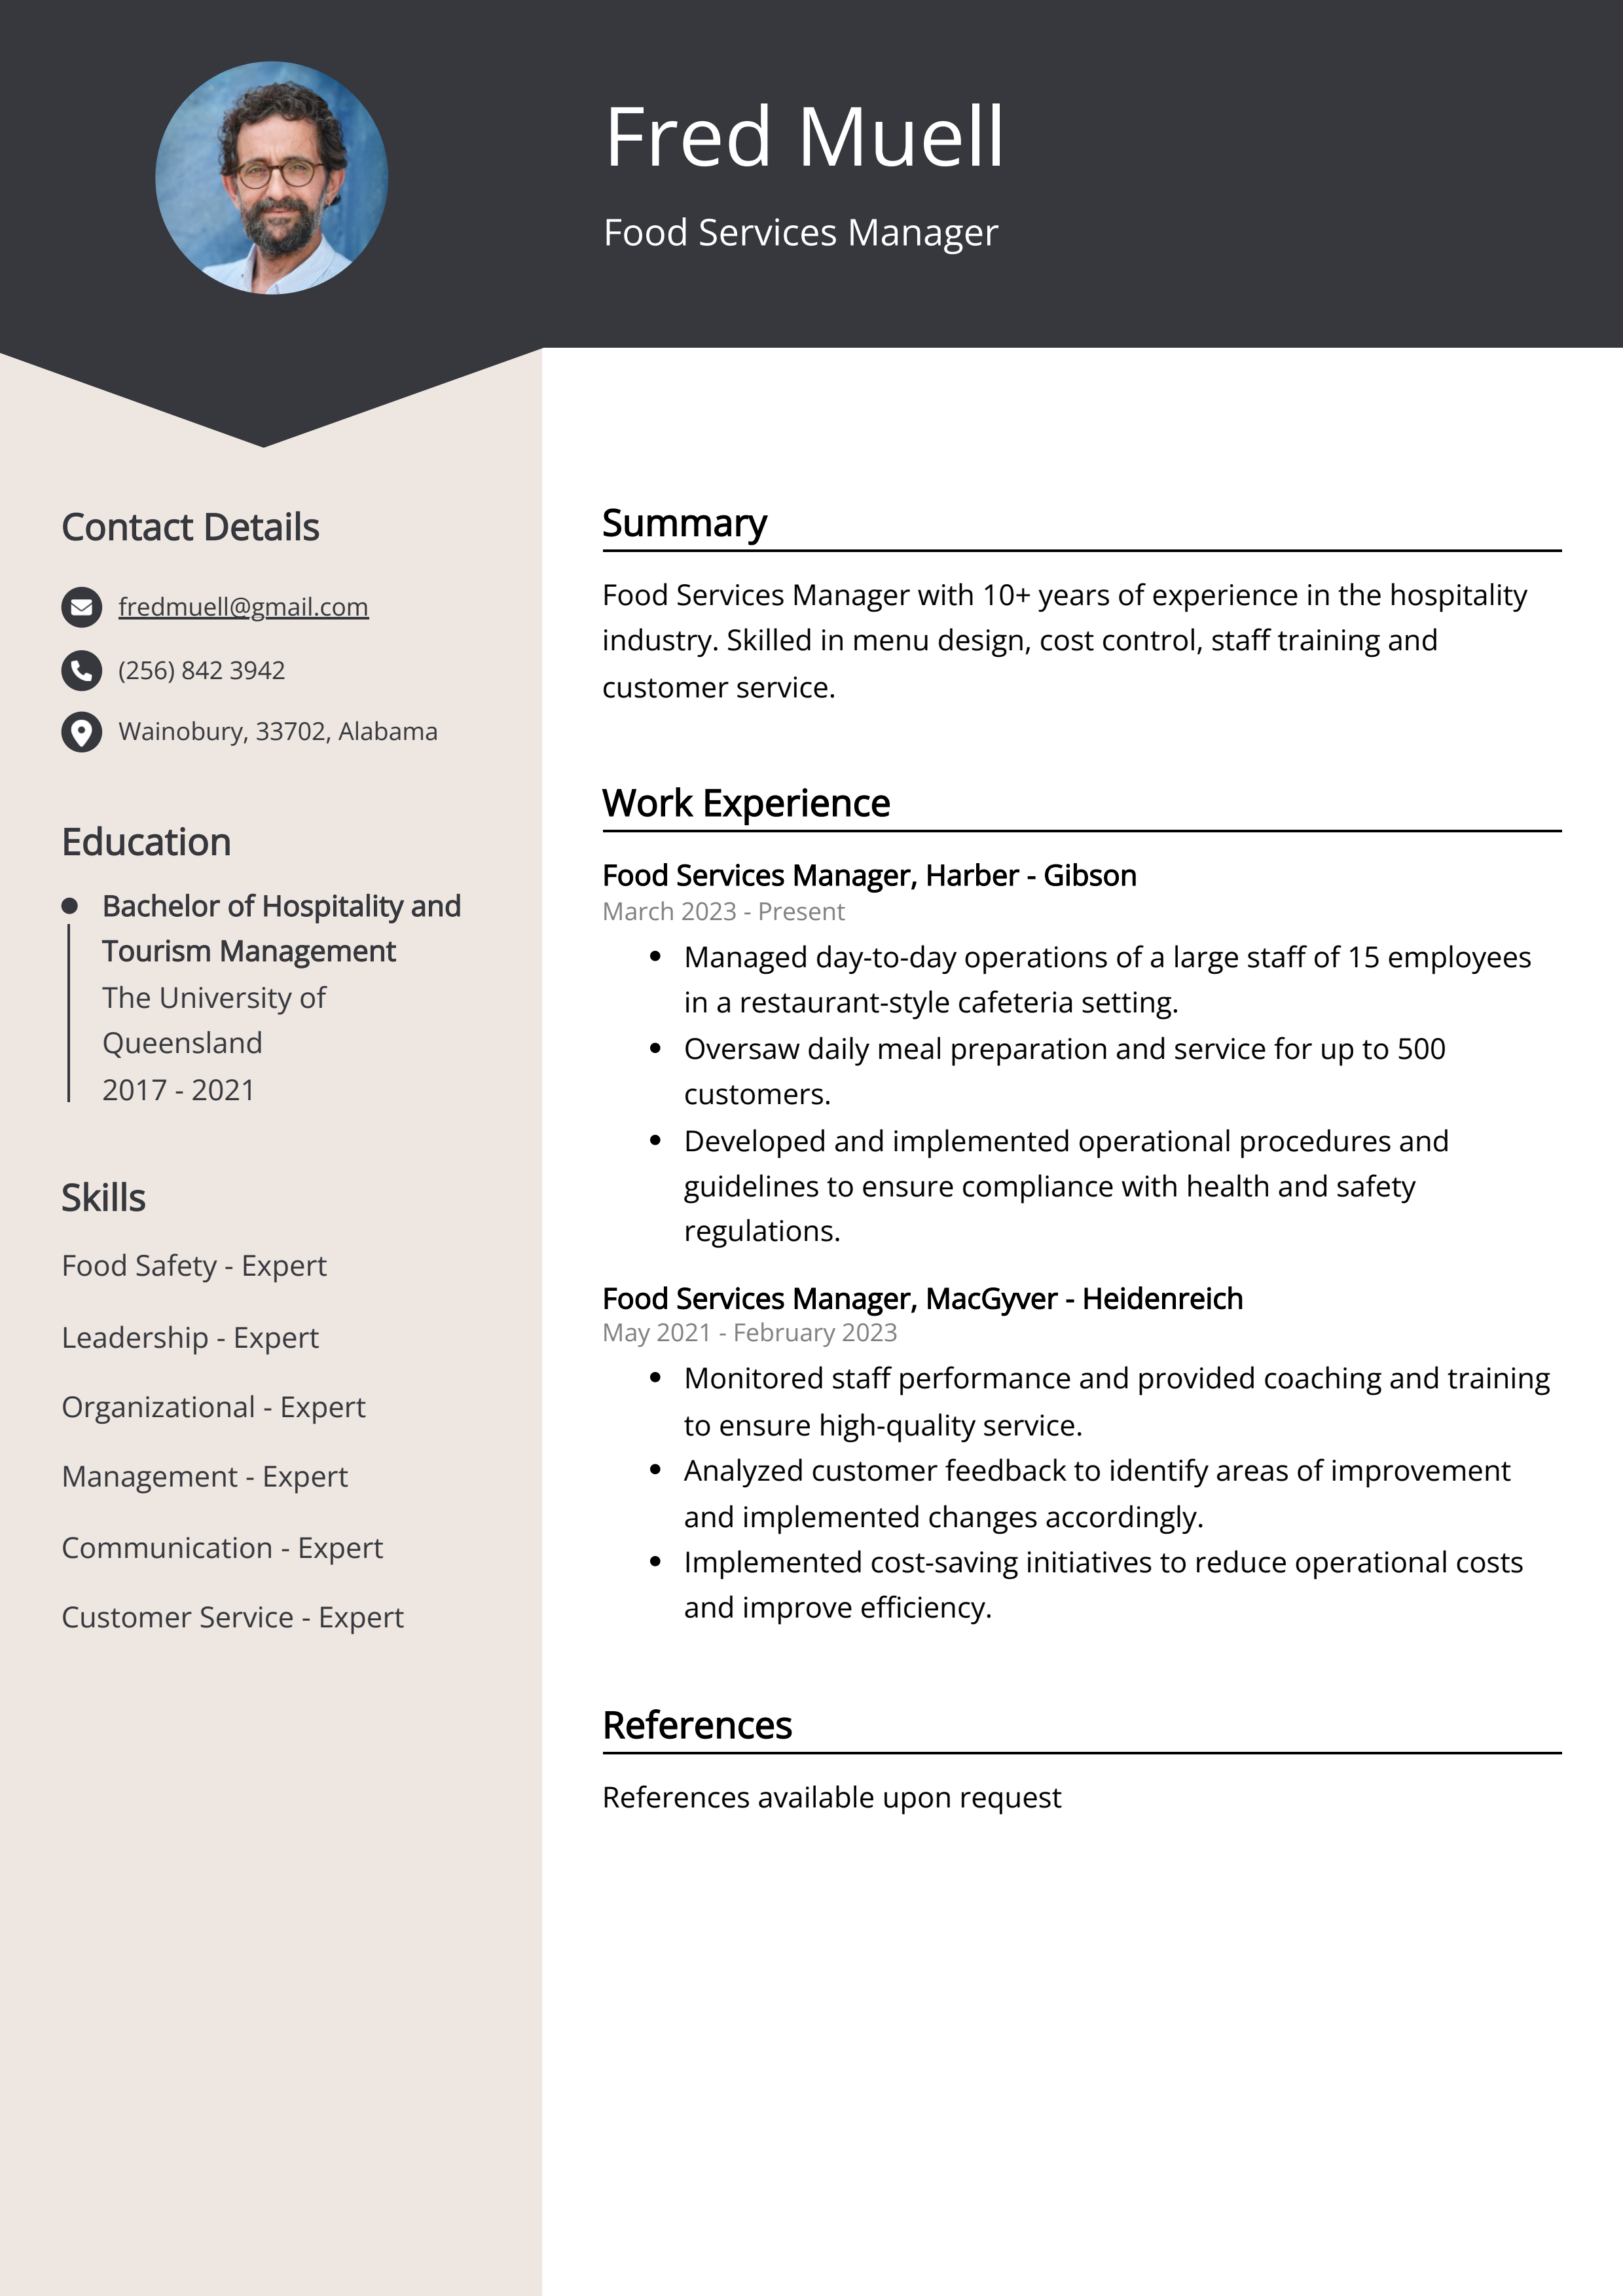 Food Services Manager Resume Example